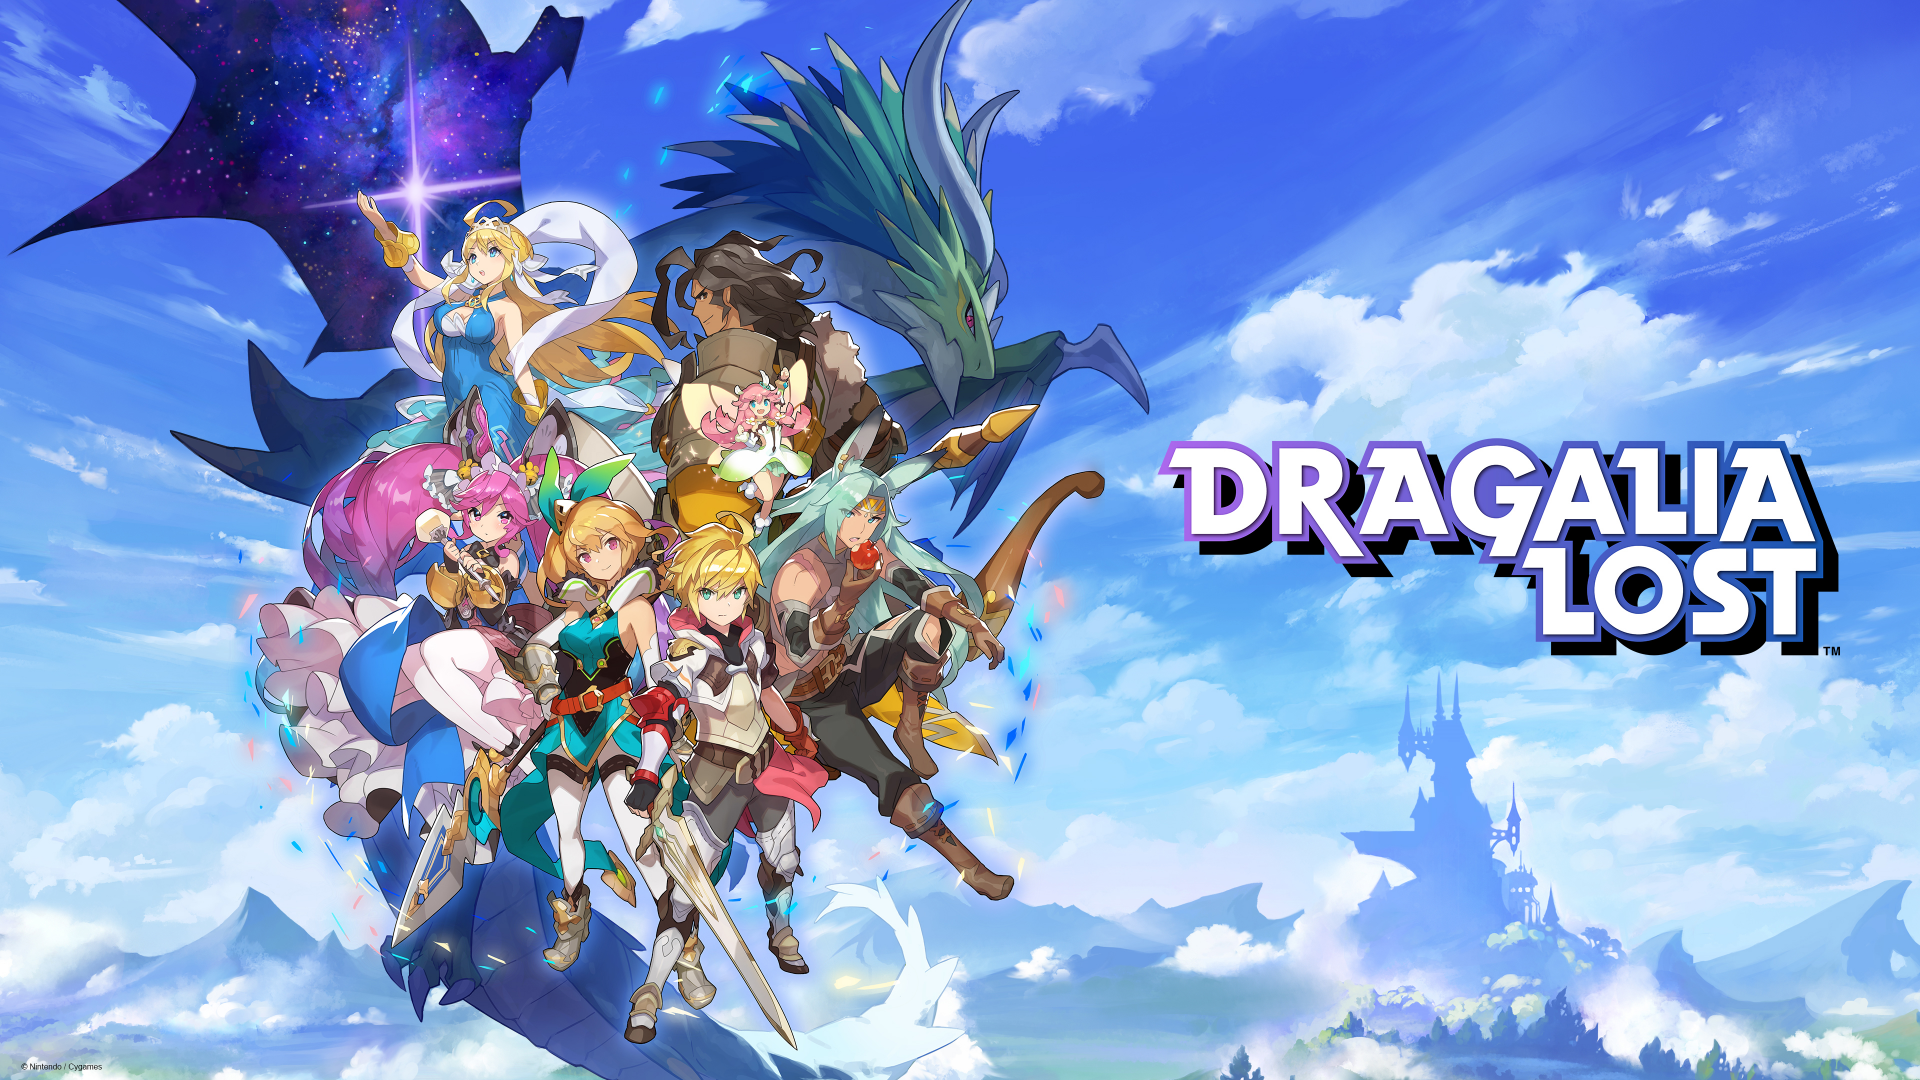 Either Luca is a moron, or they need better writing for the game :  r/DragaliaLost